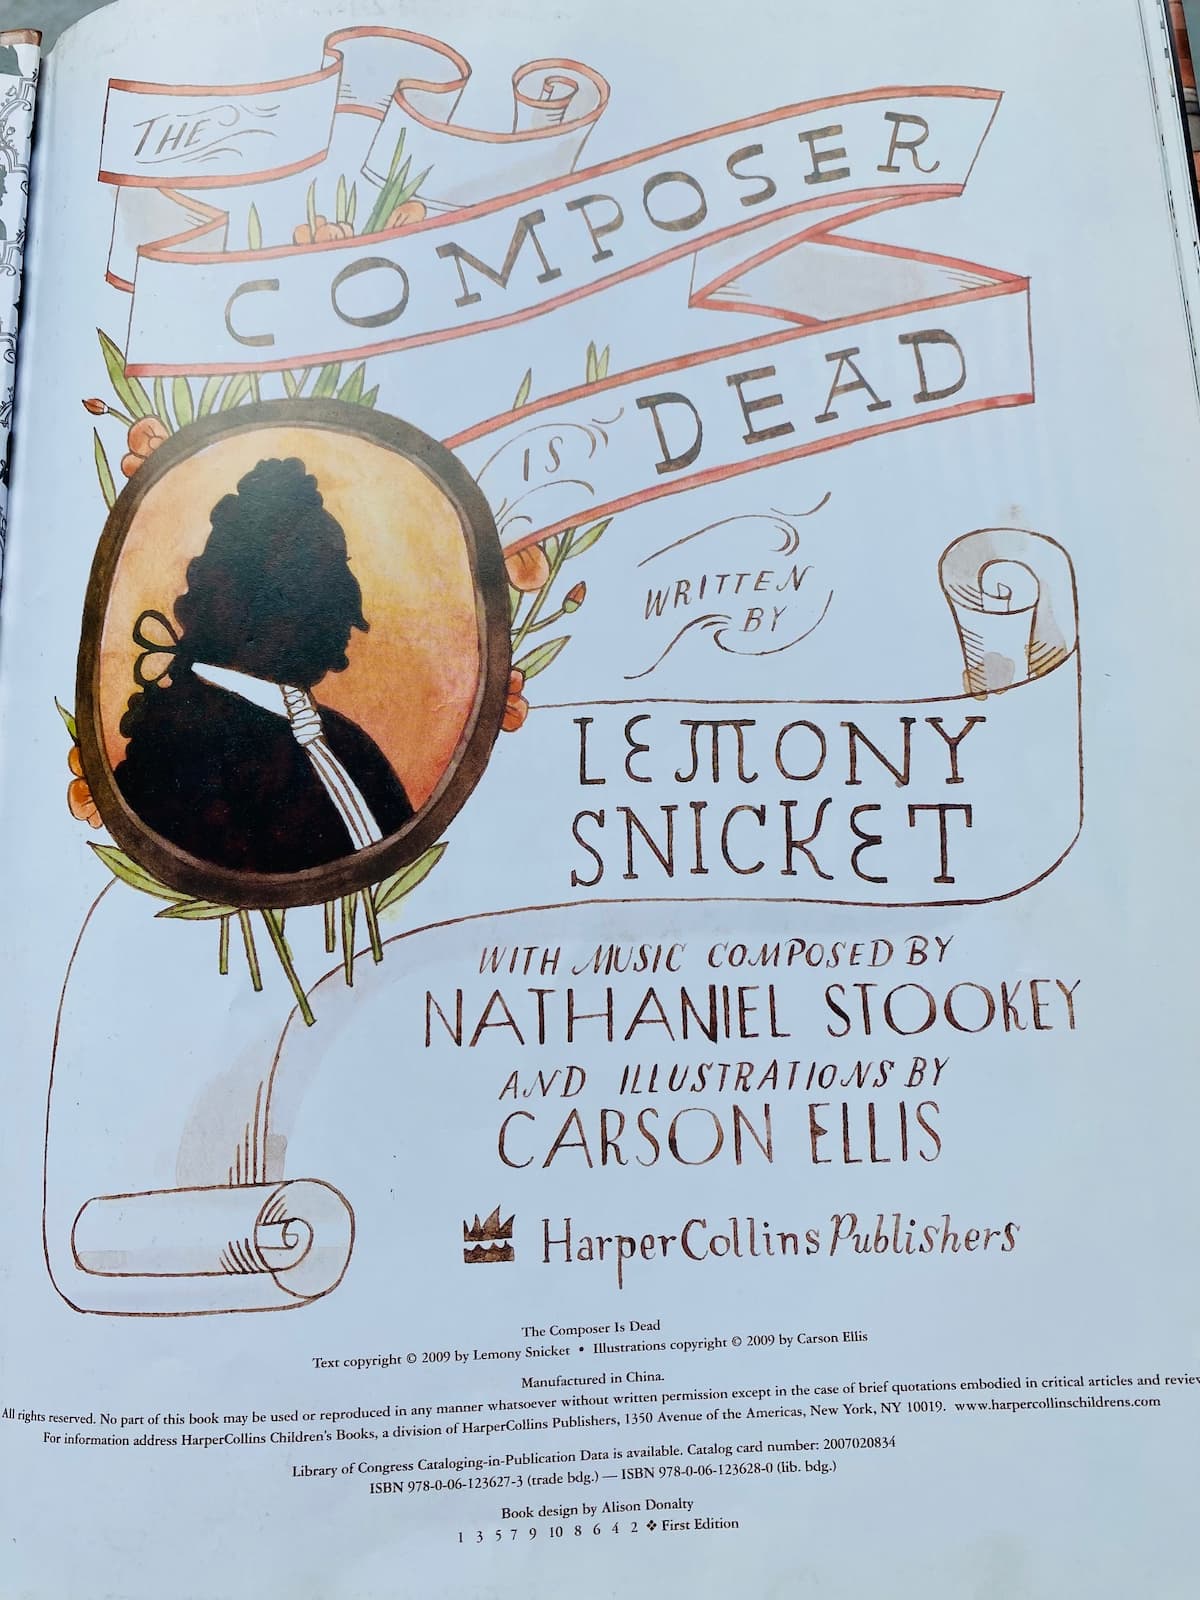 "The Composer is Dead" title page, written by Lemony Snicket, published by HarperCollins and illustrated by Carson Ellis